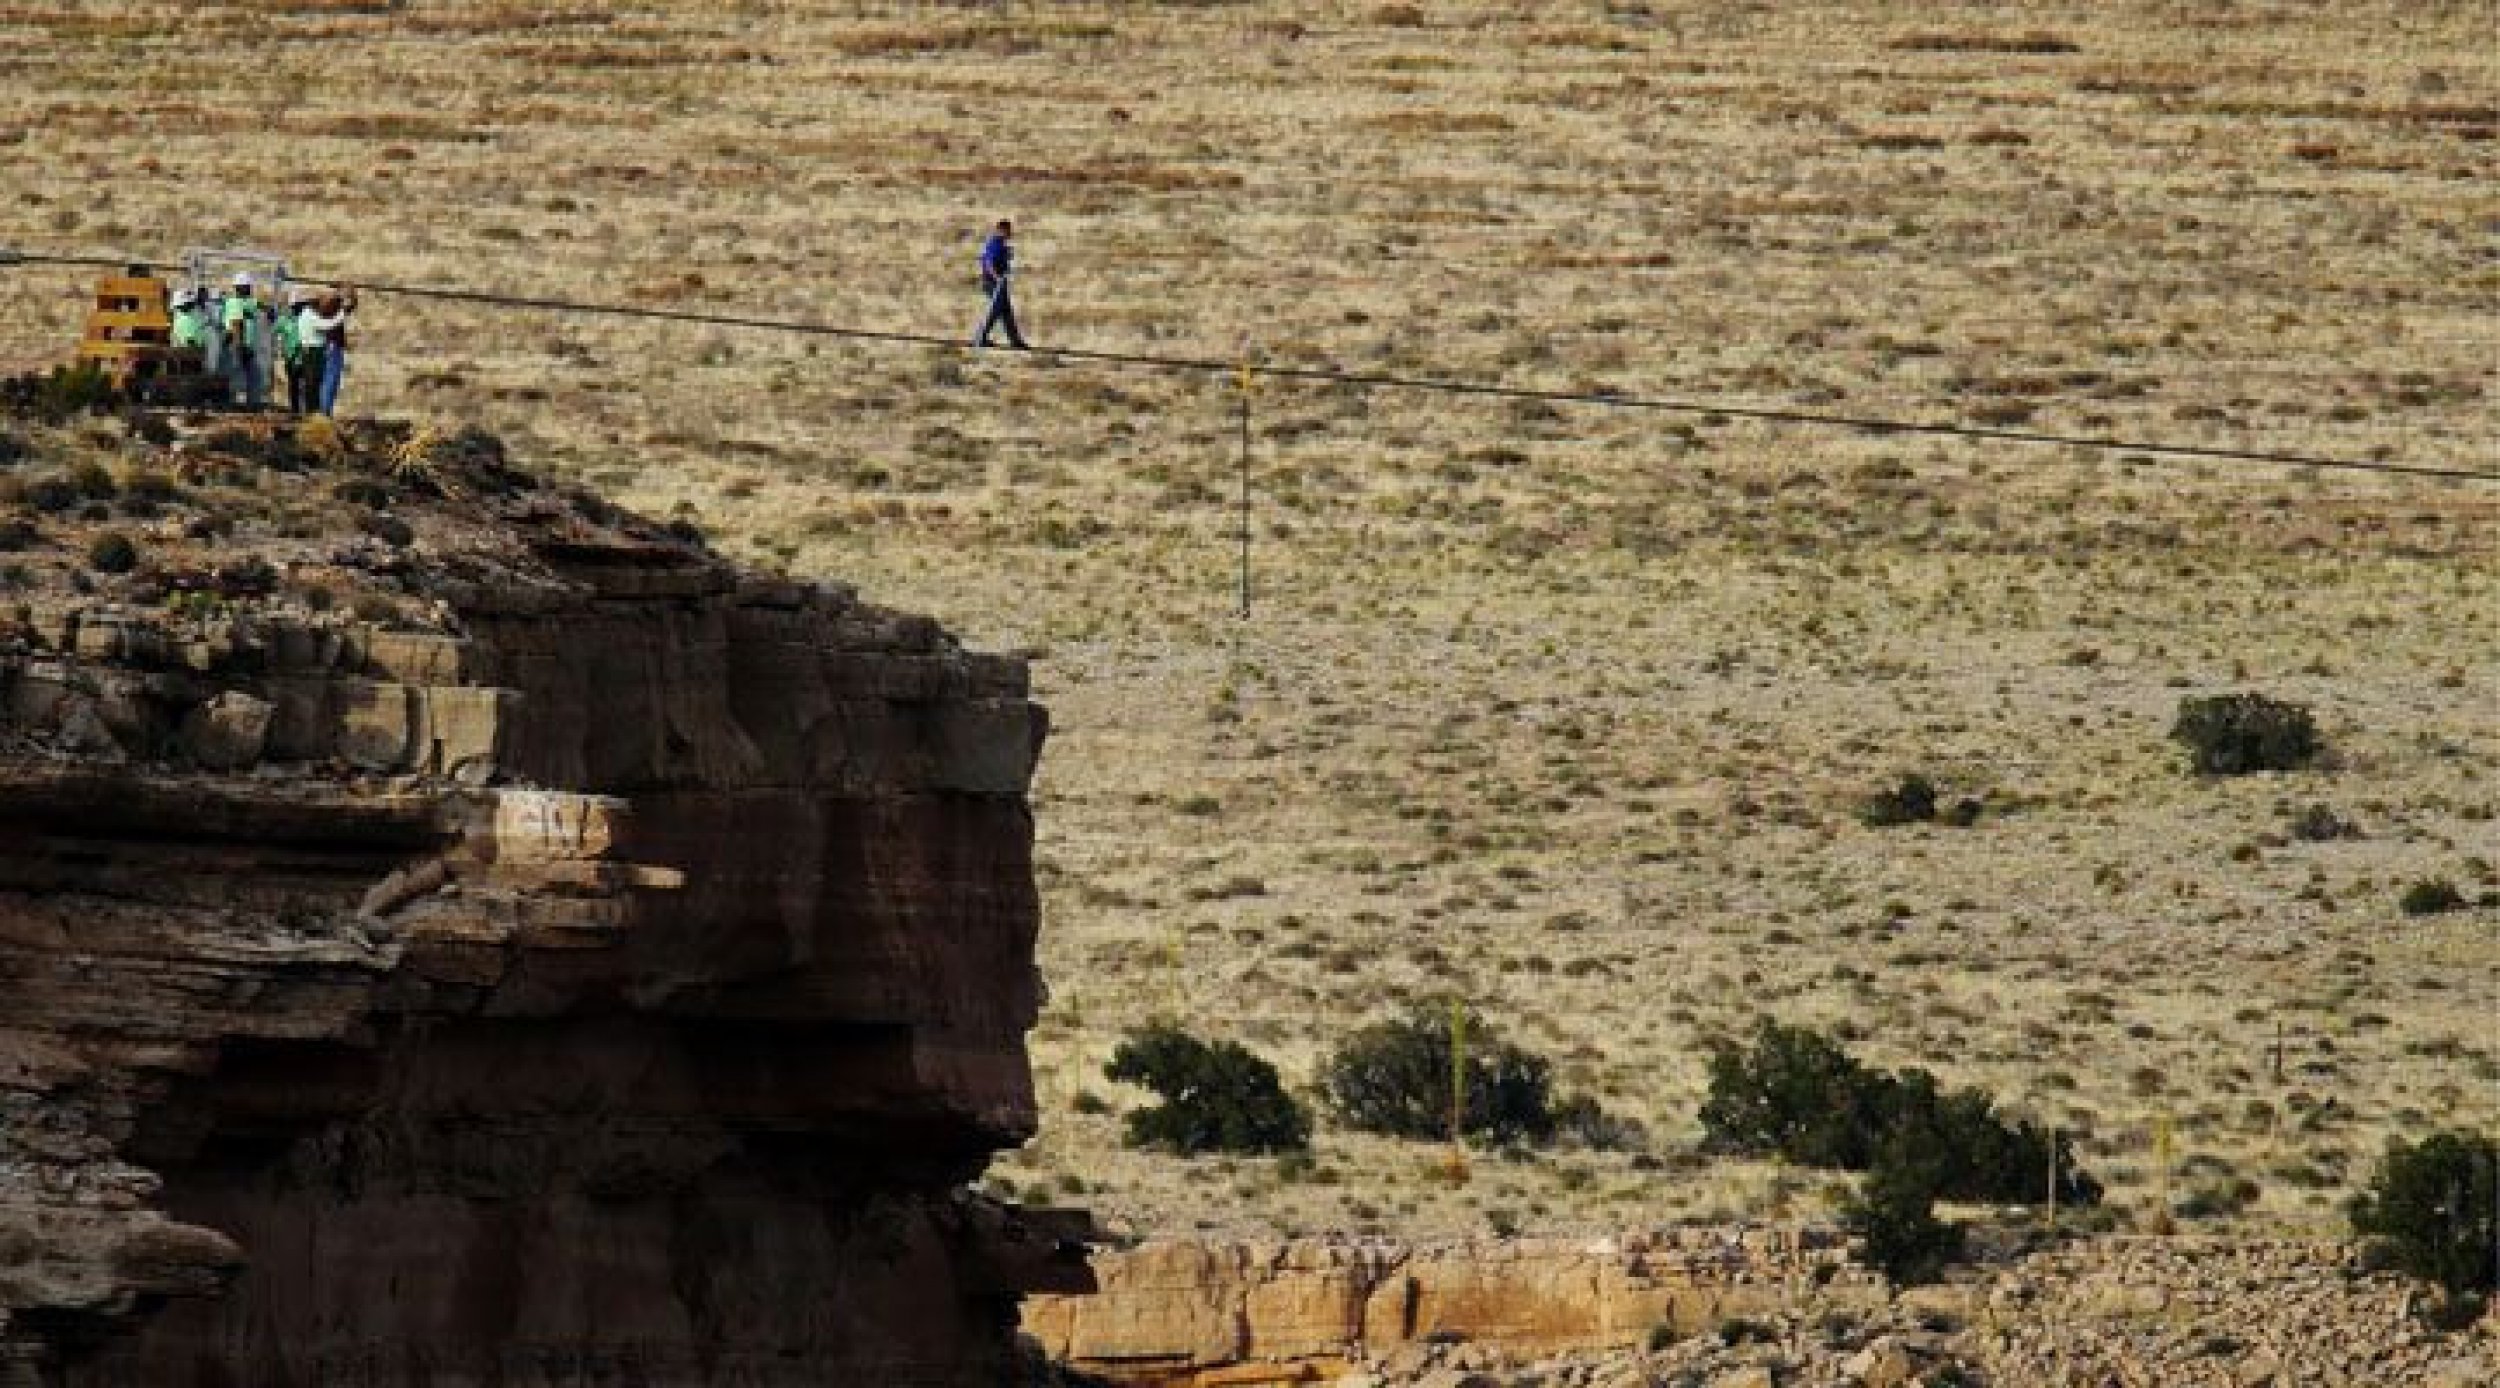 Nik Wallenda Completes Grand Canyon Wire Walk Who Are The Other Icons Of The Dare Devil World